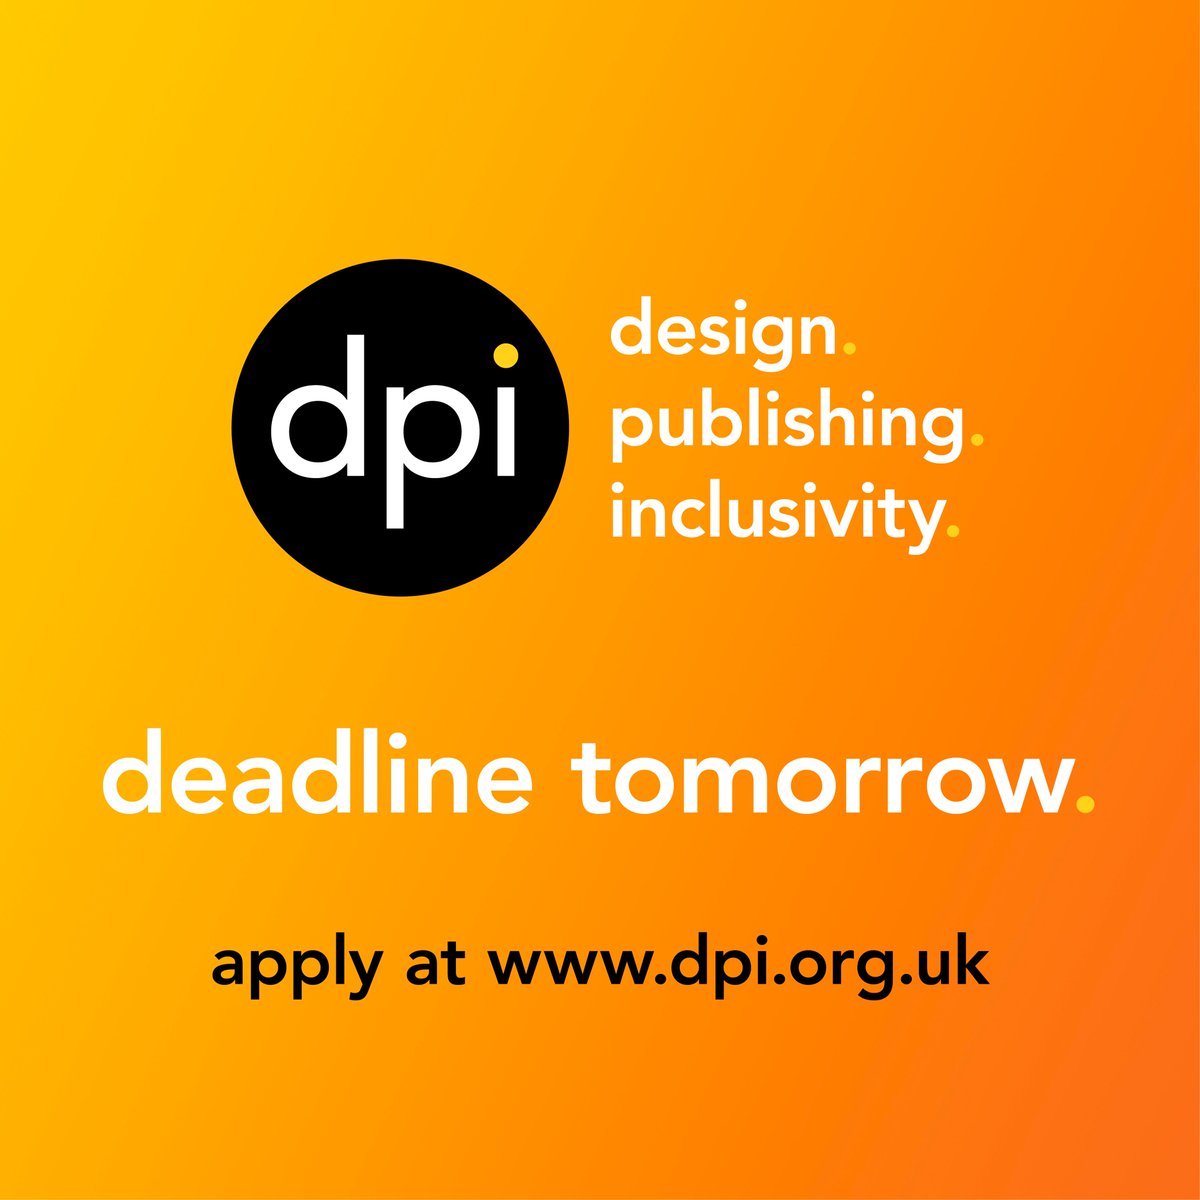 🌟DEADLINE TOMORROW 🌟 Closes Midnight October 7th - check out dpi.org.uk for more information and to apply